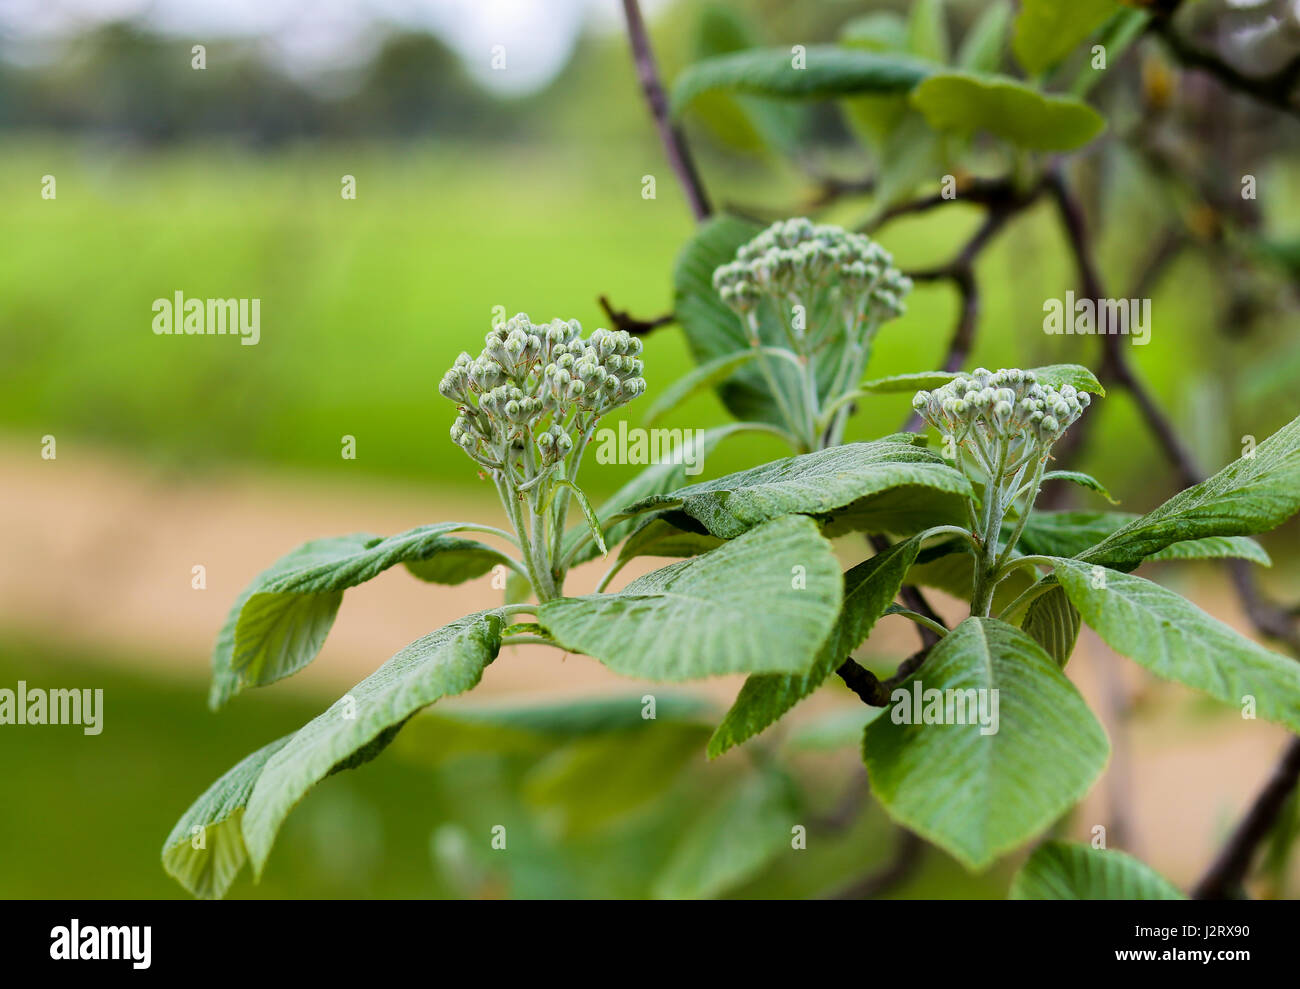 Sorbus aria 'Lutescens', Golden Whitebeam, in bud blurred background Stock Photo